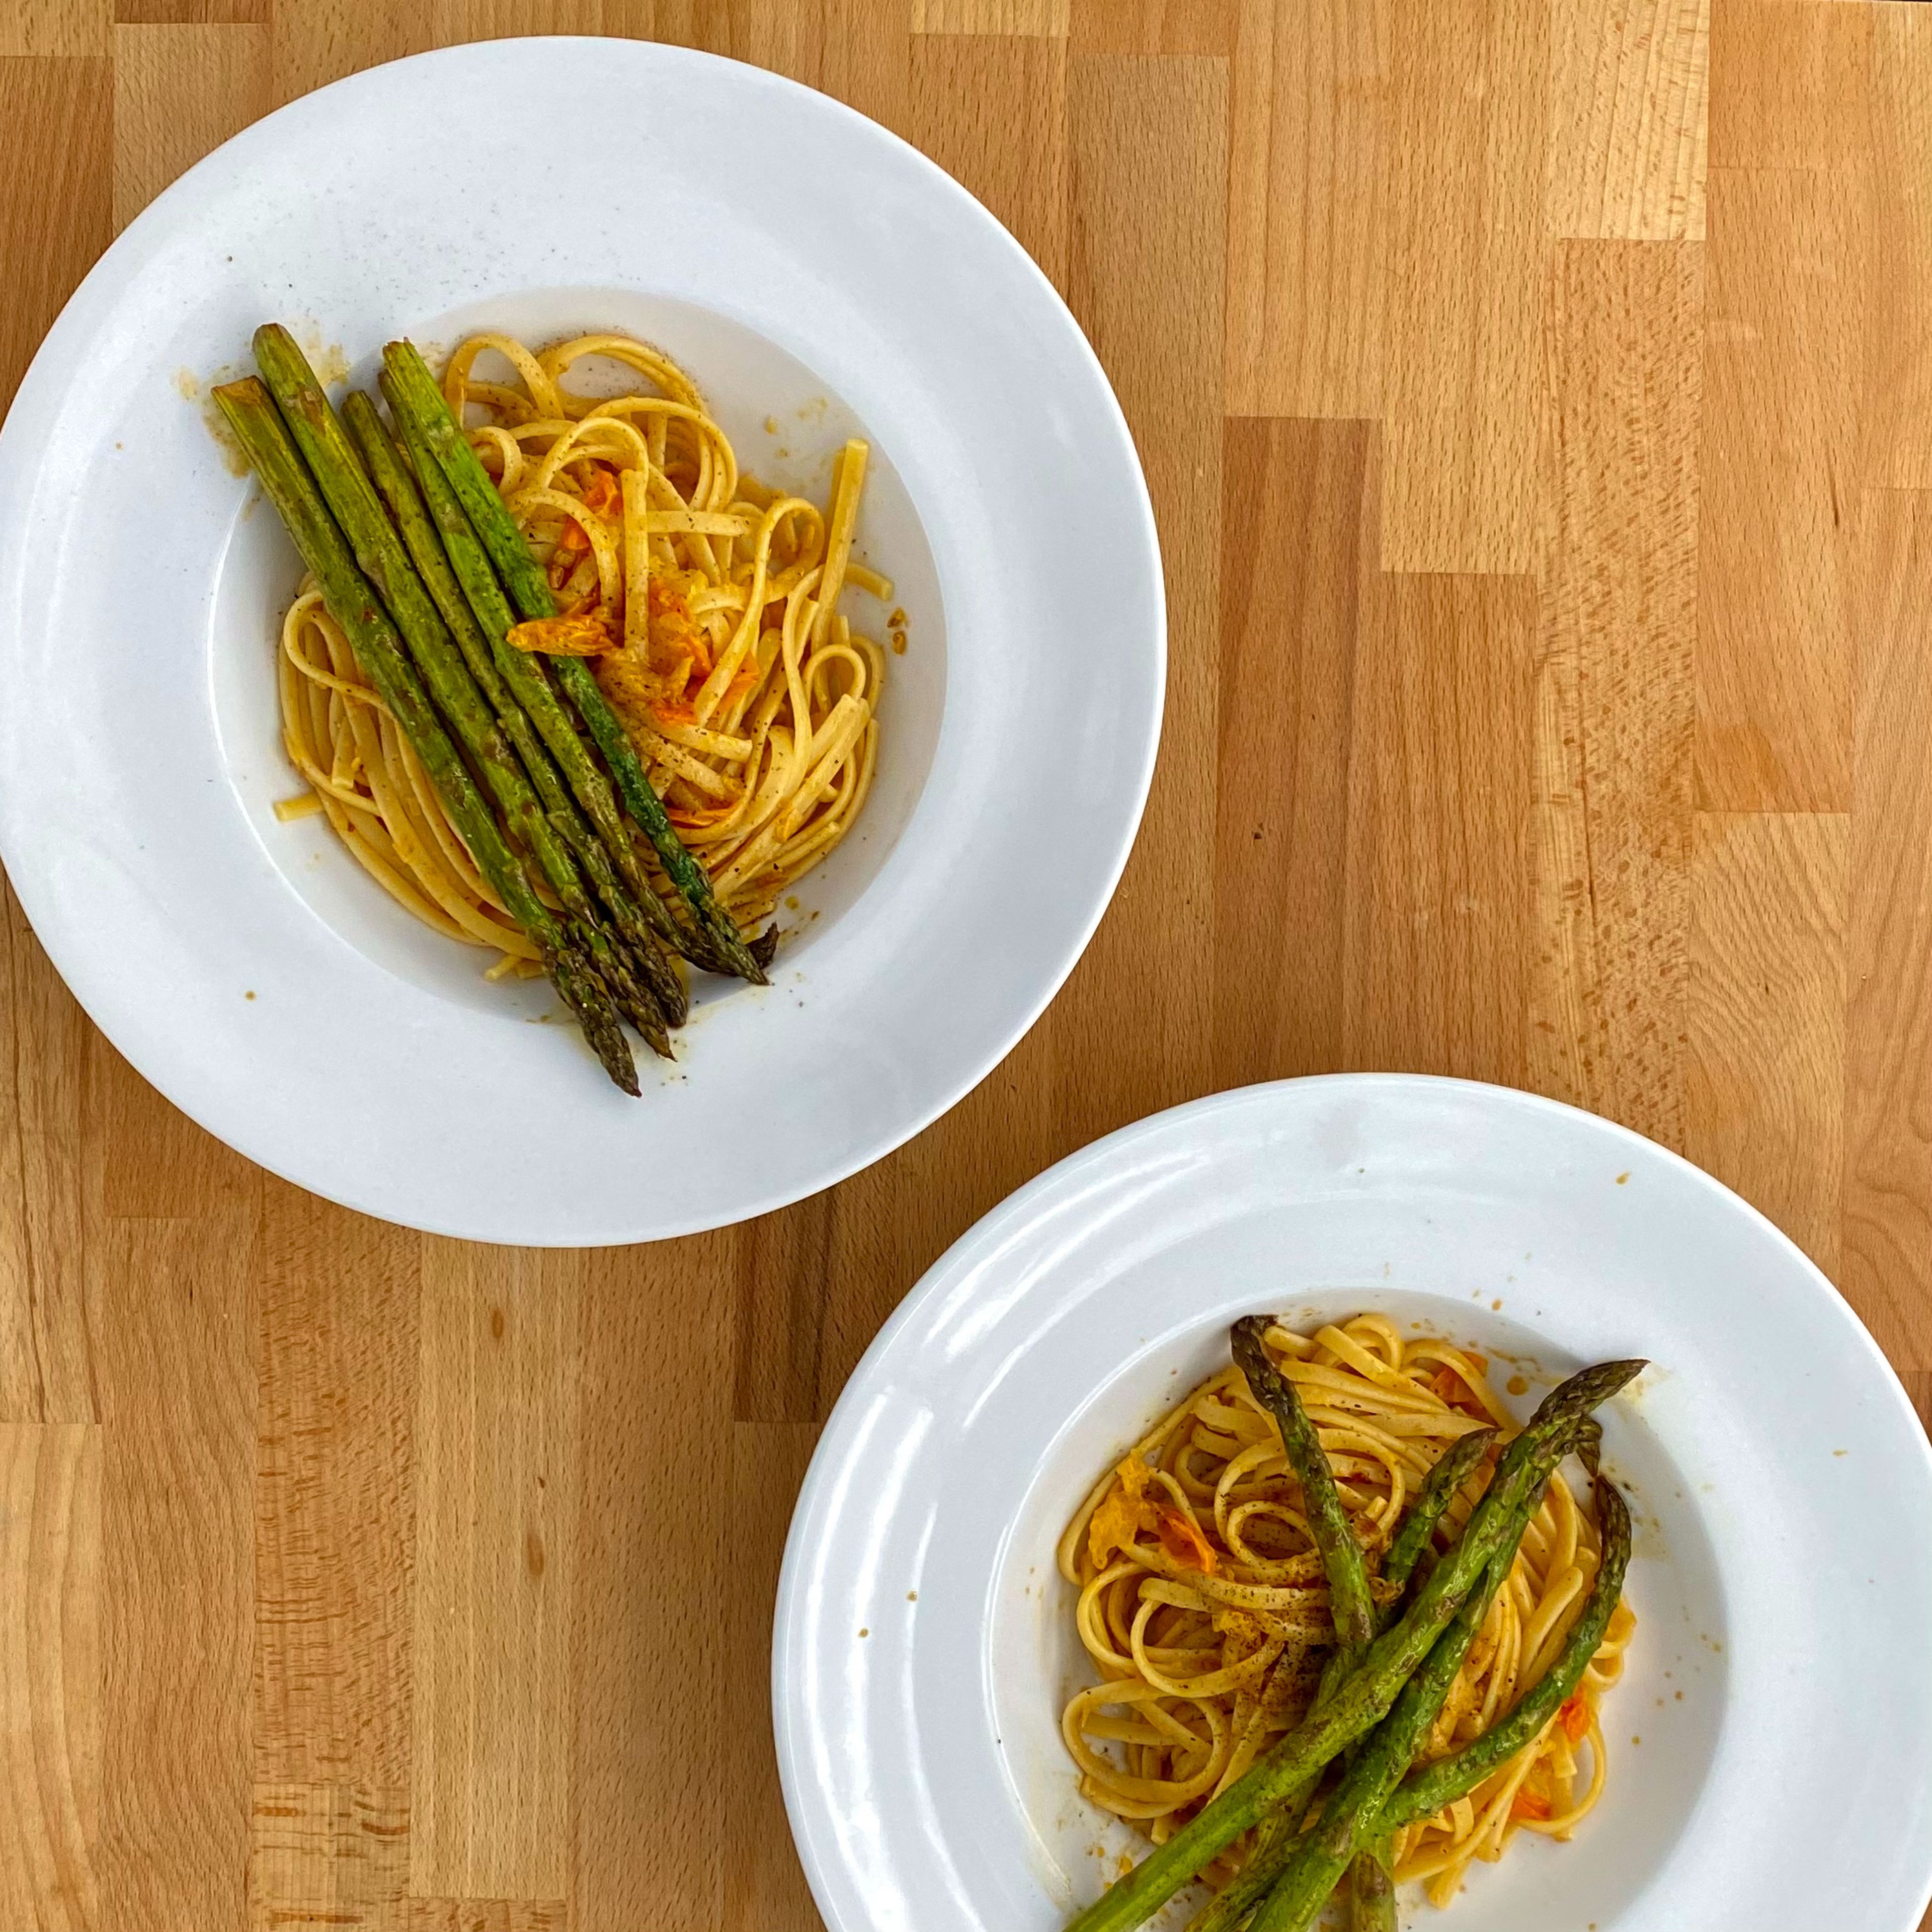 Arrange the spaghetti with the asparagus as you like. Before serving drizzle some of the asparagus marinade over the dish. This gives you that little bit of extra. Enjoy:)